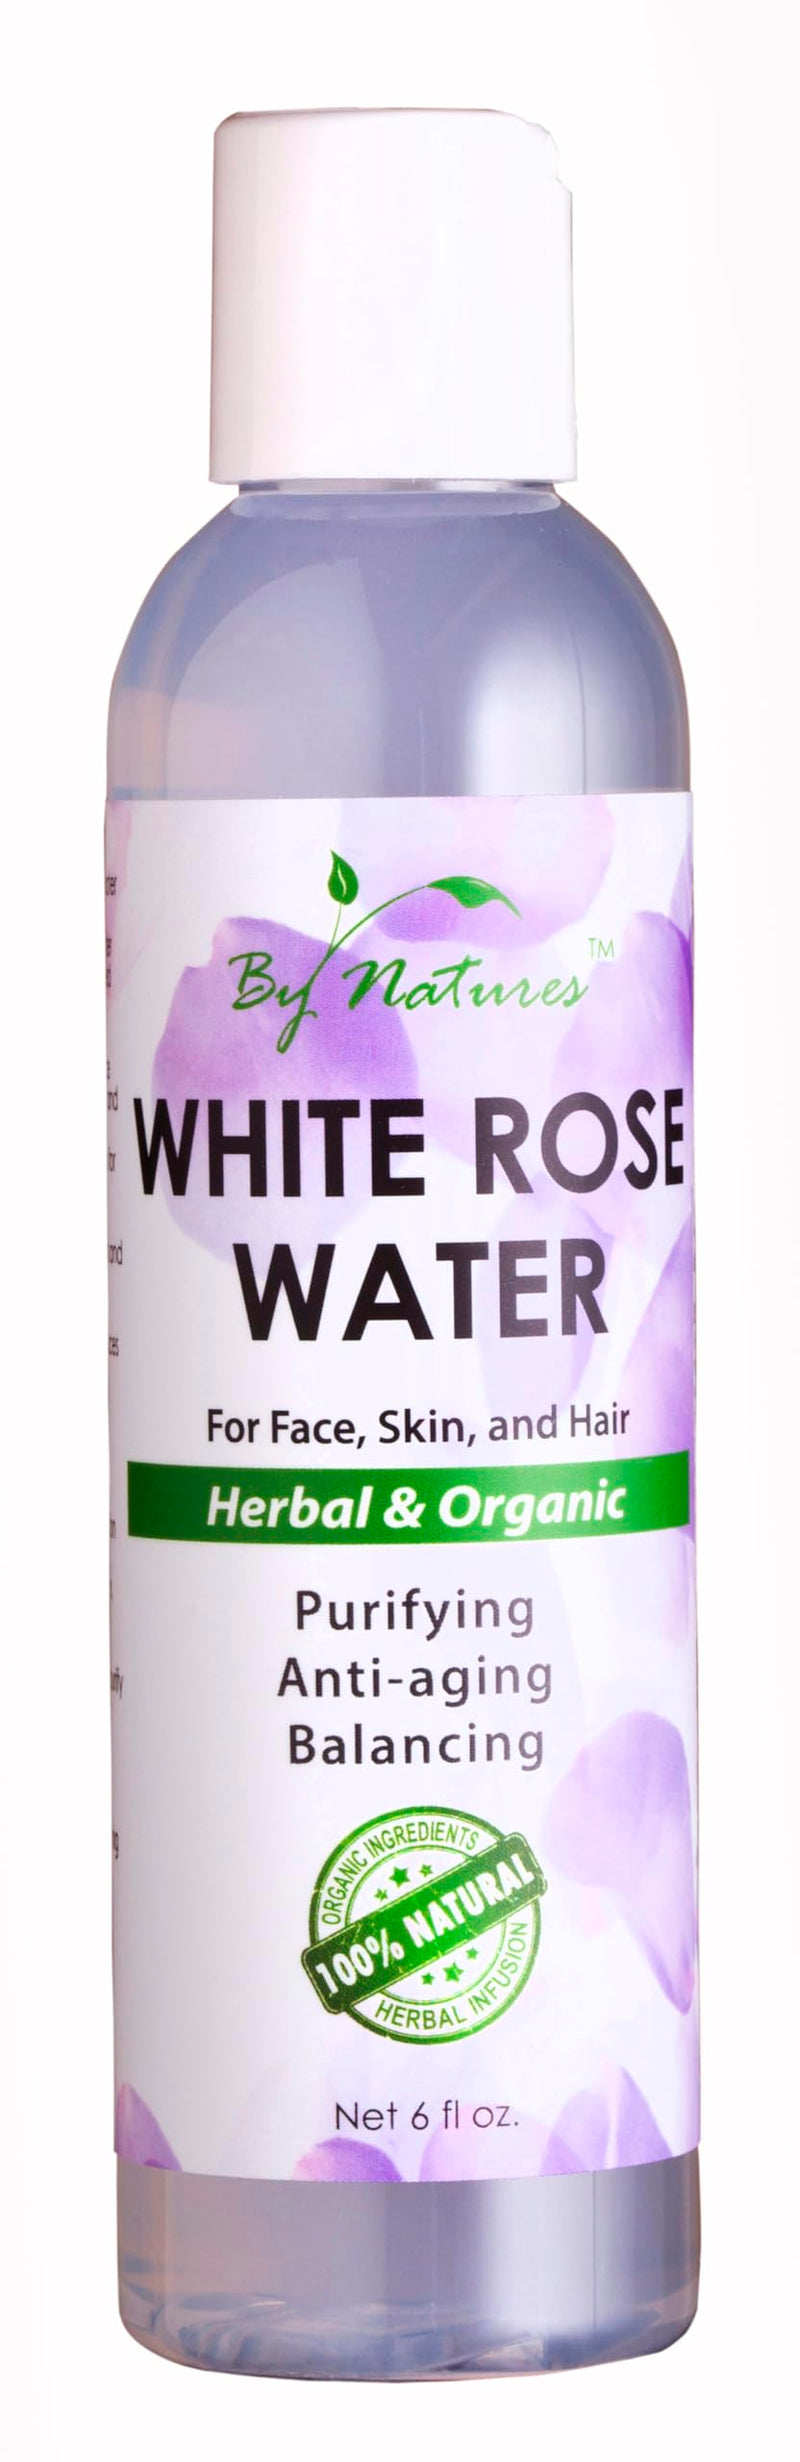 By Natures White Rose Water 6.0 Fl Oz (Pack of 1)